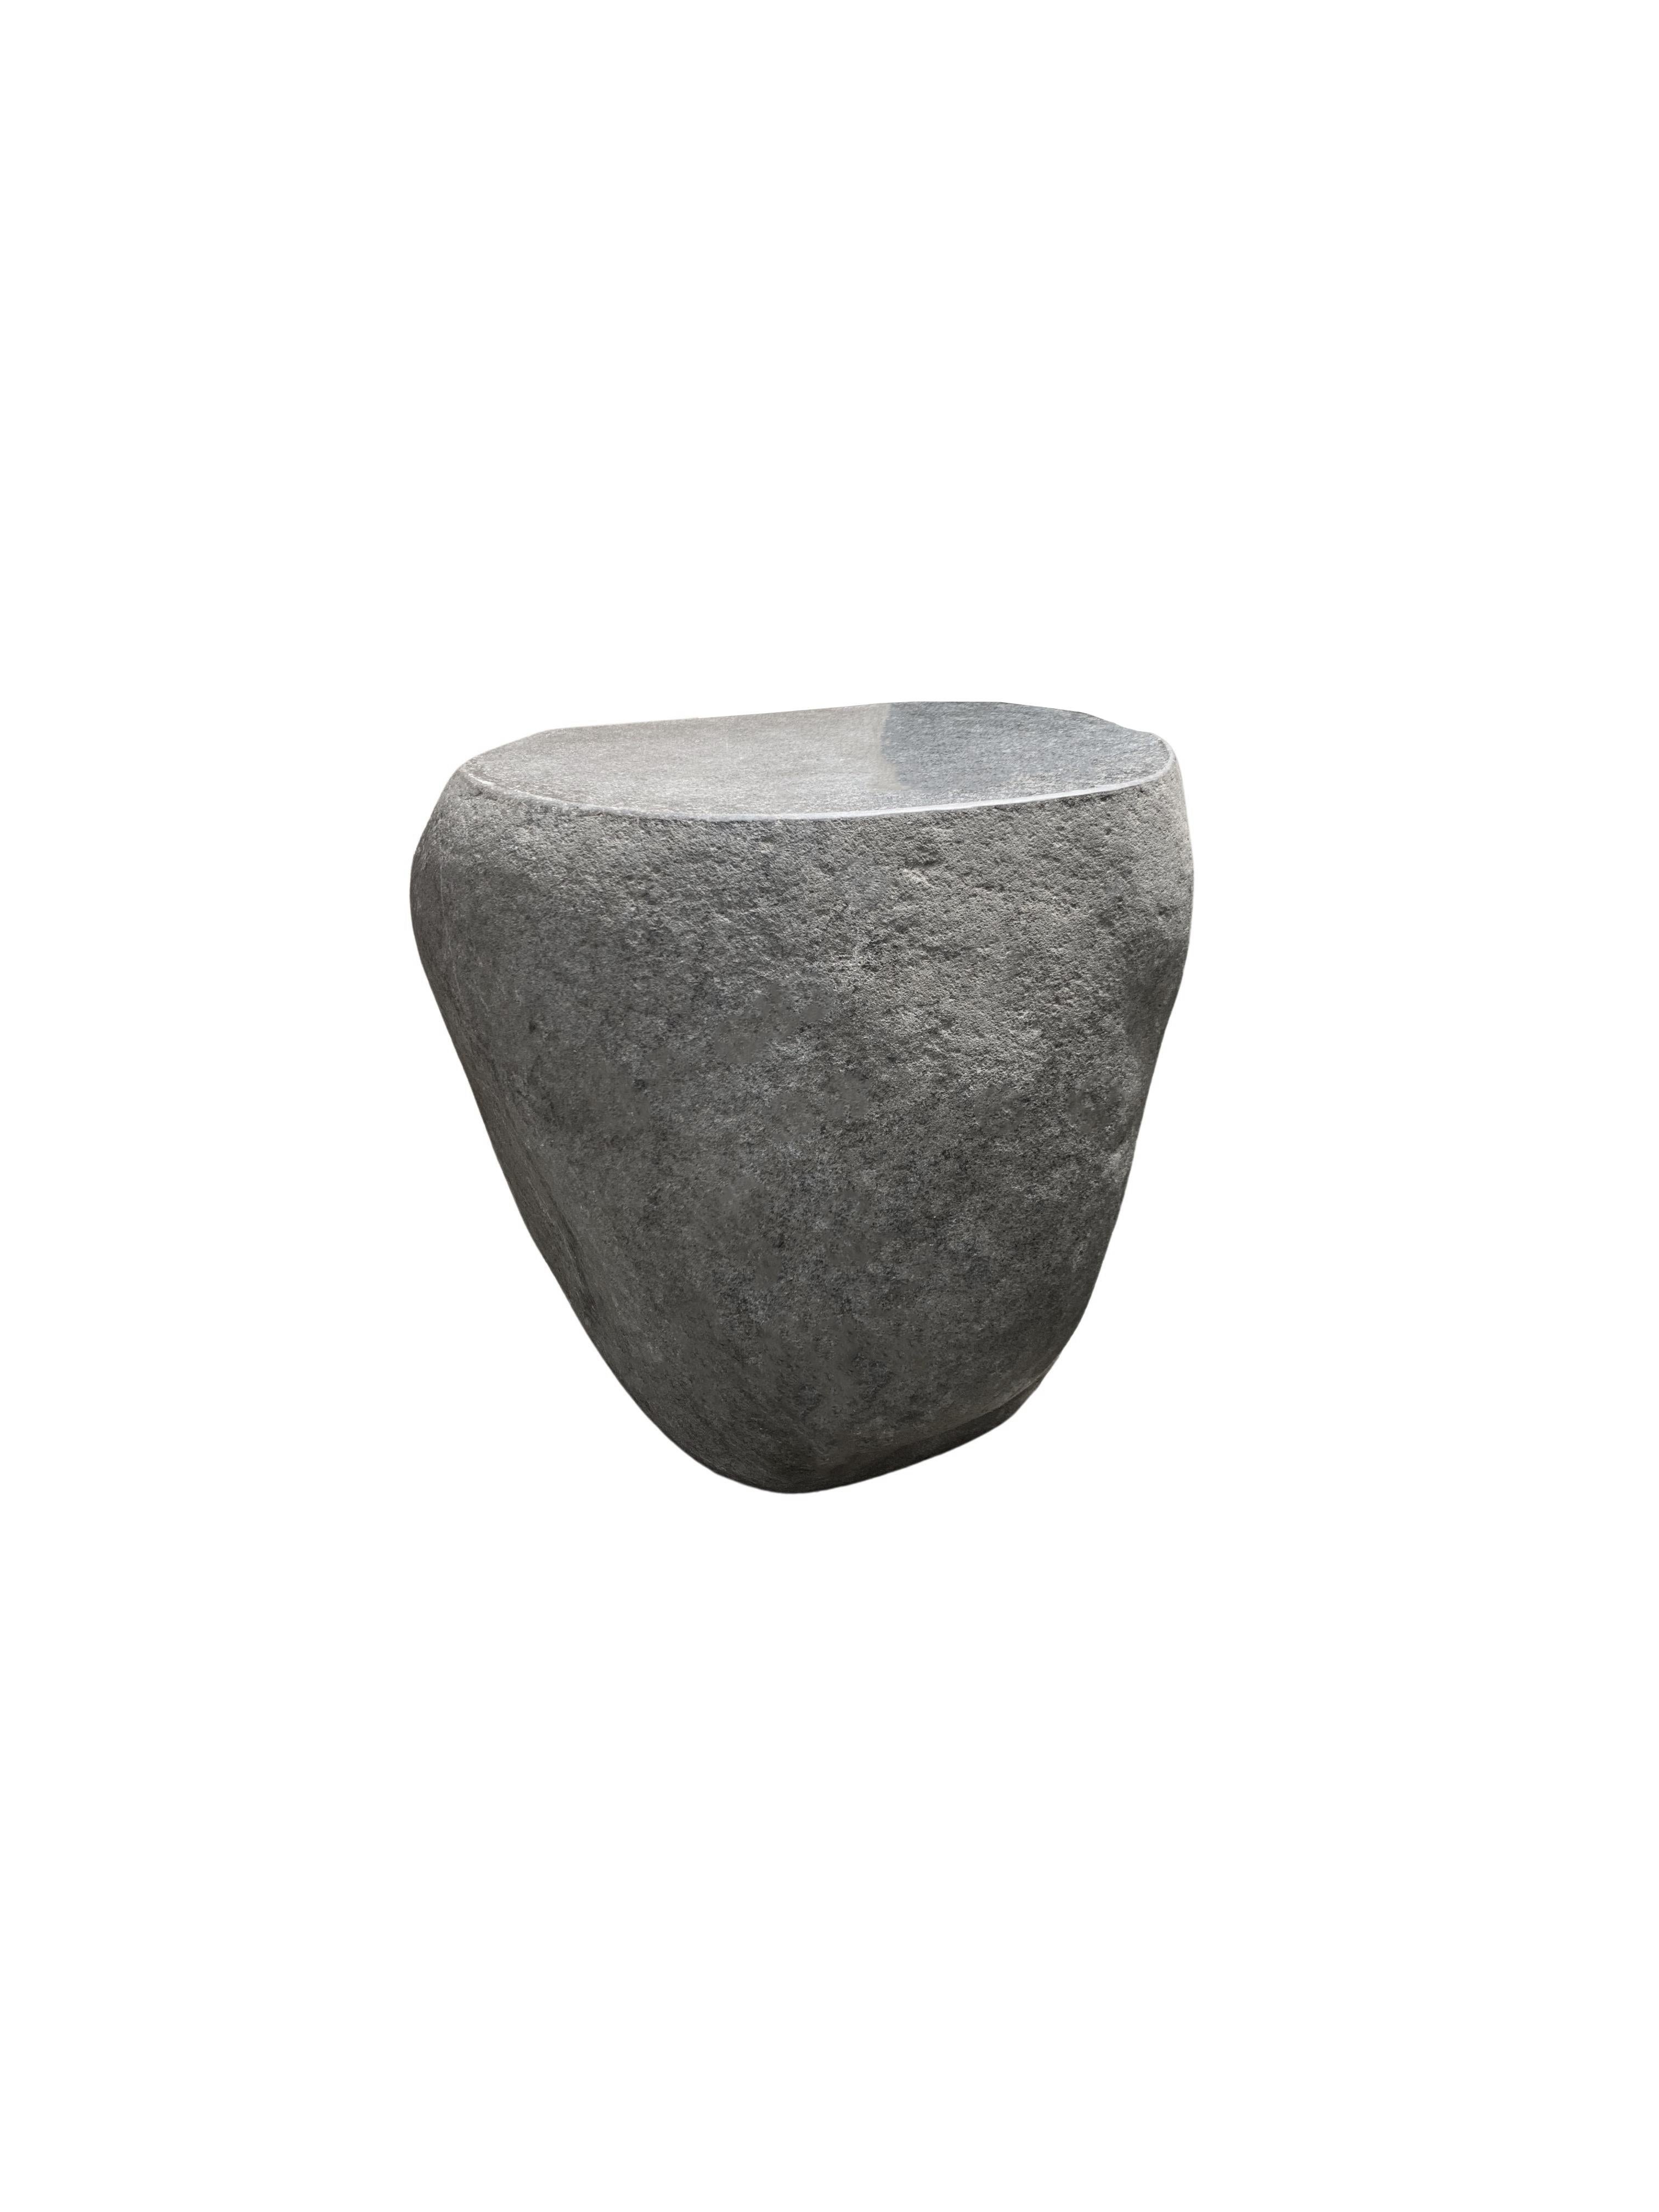 Indonesian Solid Stone Side Table / Pedestal from Java, Indonesia